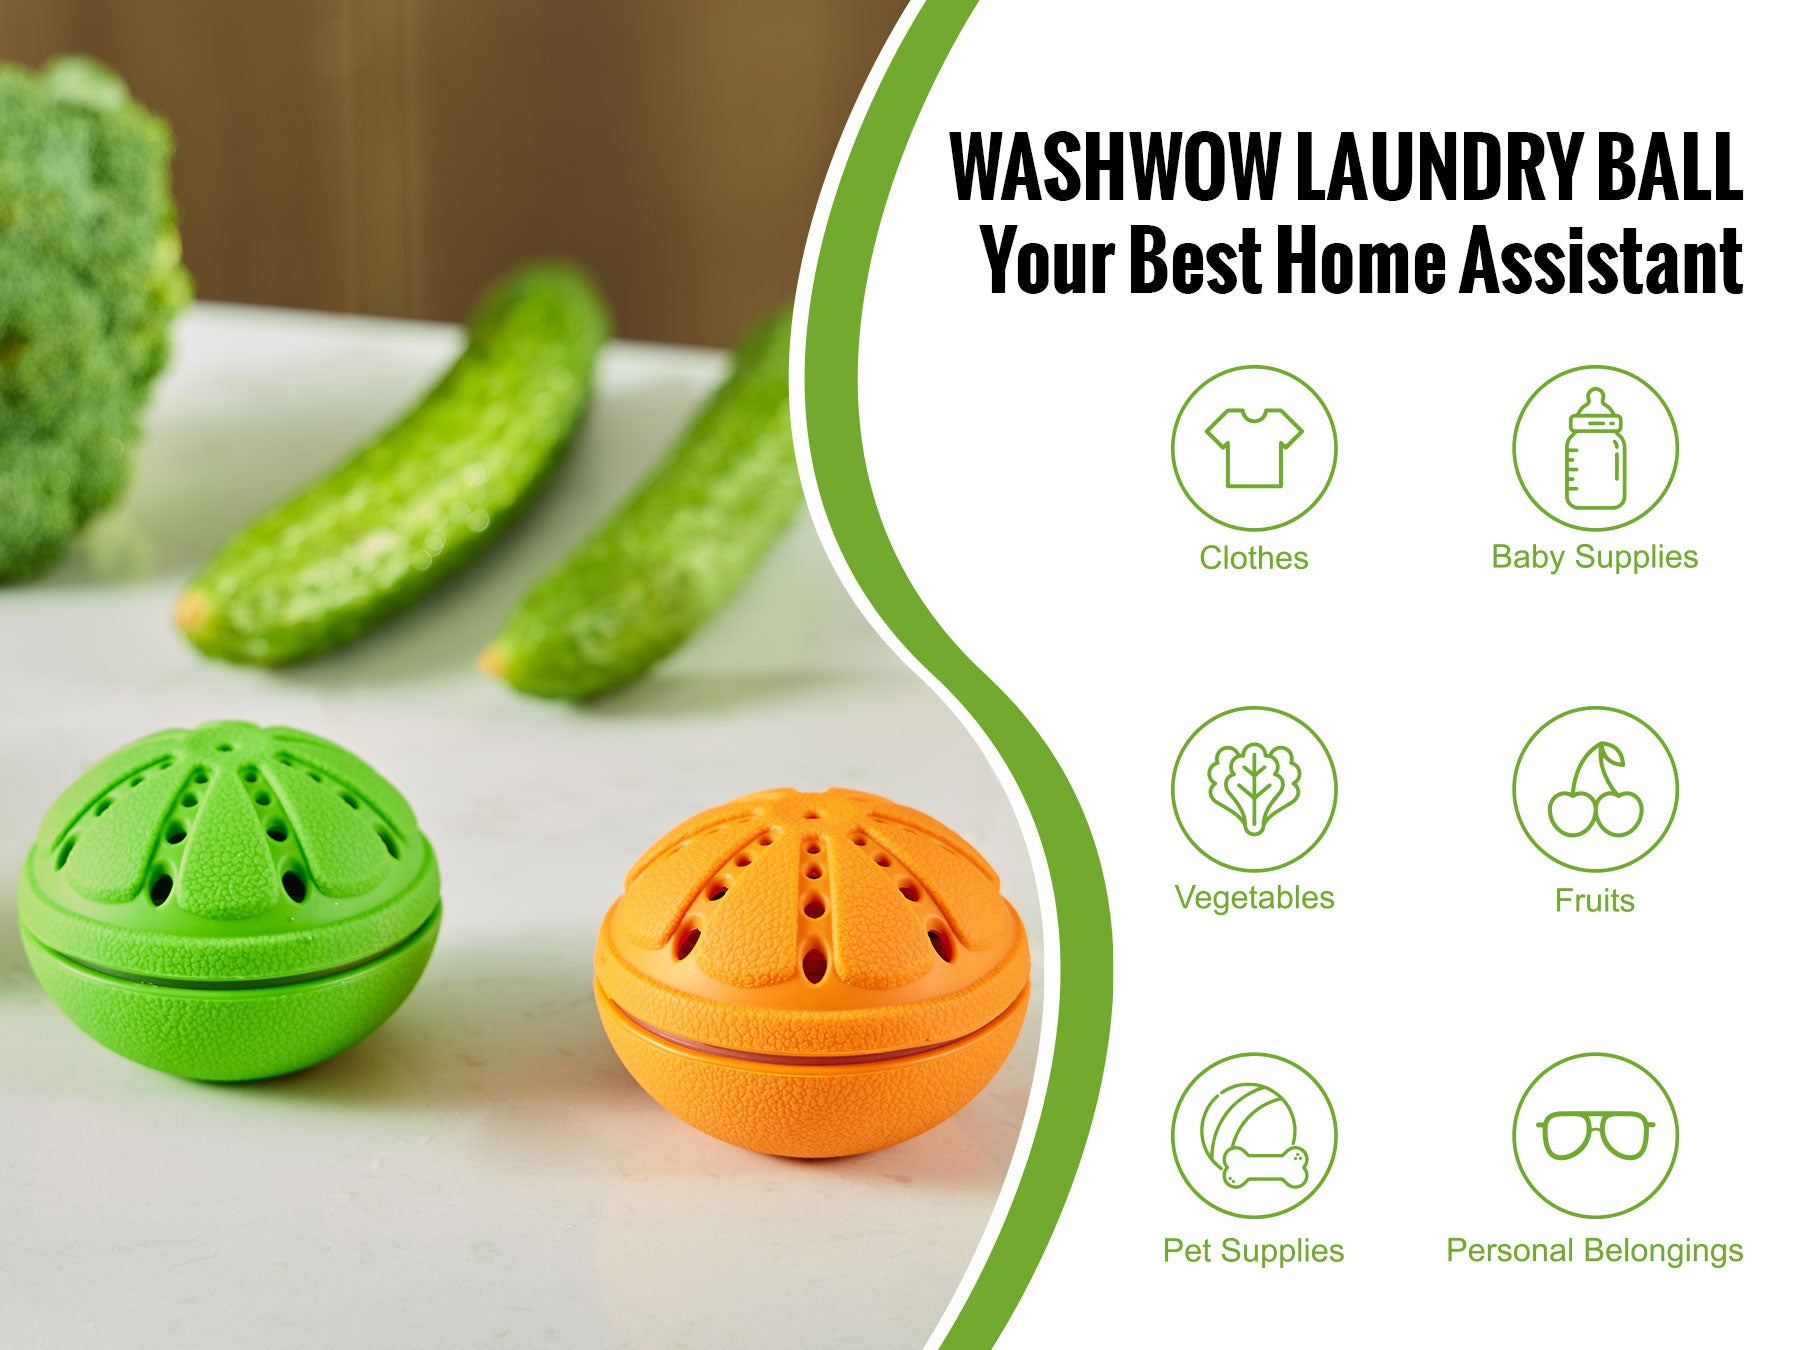 WASHWOW Laundry Ball: Your Best Home Assistant